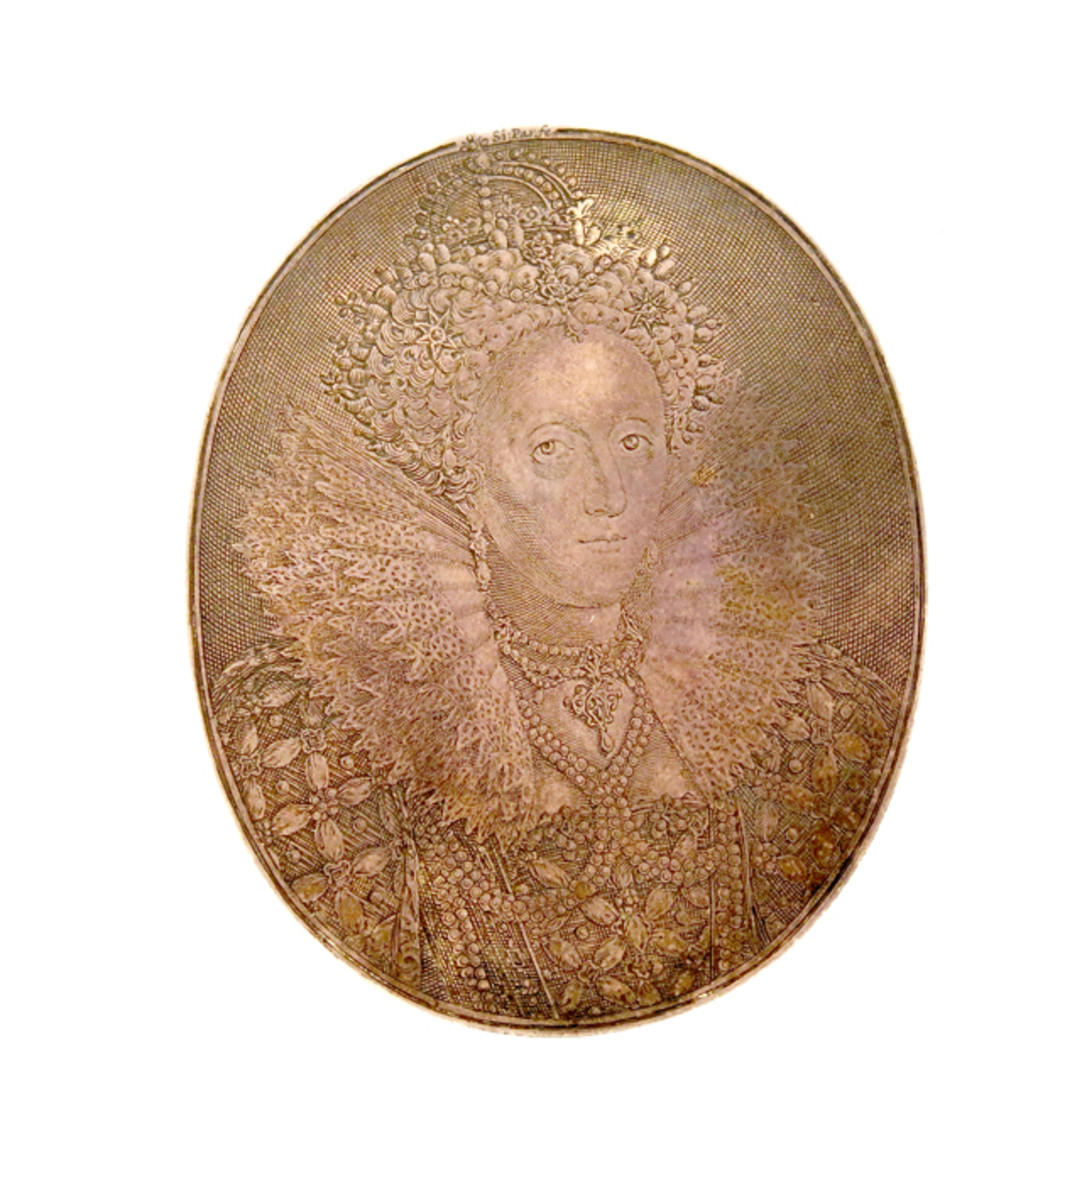 Oval silver portrait medal by Simon de Passe of Elizabeth I c. 1616, after the miniature by Isaac Oliver; 61 x 49.5 mm and signed “Si: Pas: fe”. Along with the royal shield on the reverse is the epigram: QVI LEO DE IVDA EST ET FLOS DE IESSE LEONES  / TEGAT ET FLORES ELIZABETHA TVOS [May Juda’s lyon and the root of Jesse / Protect thy lyons and thy flowers, Sweet Bess]. It carries an estimate of £8,000-£12,000.